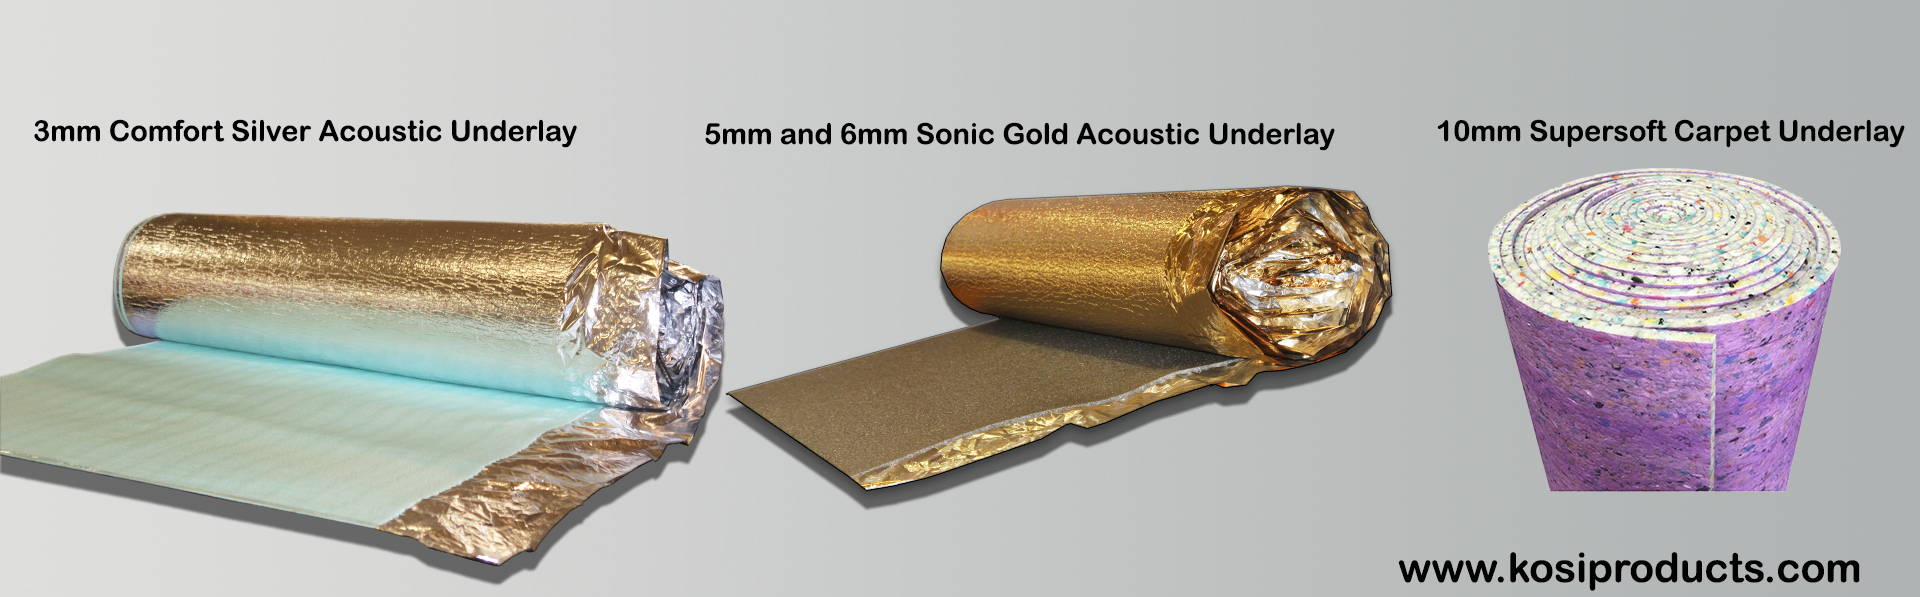 Floor Acoustic and Heat Insulation Underlay Wood Laminate15m² Roll 3mm 